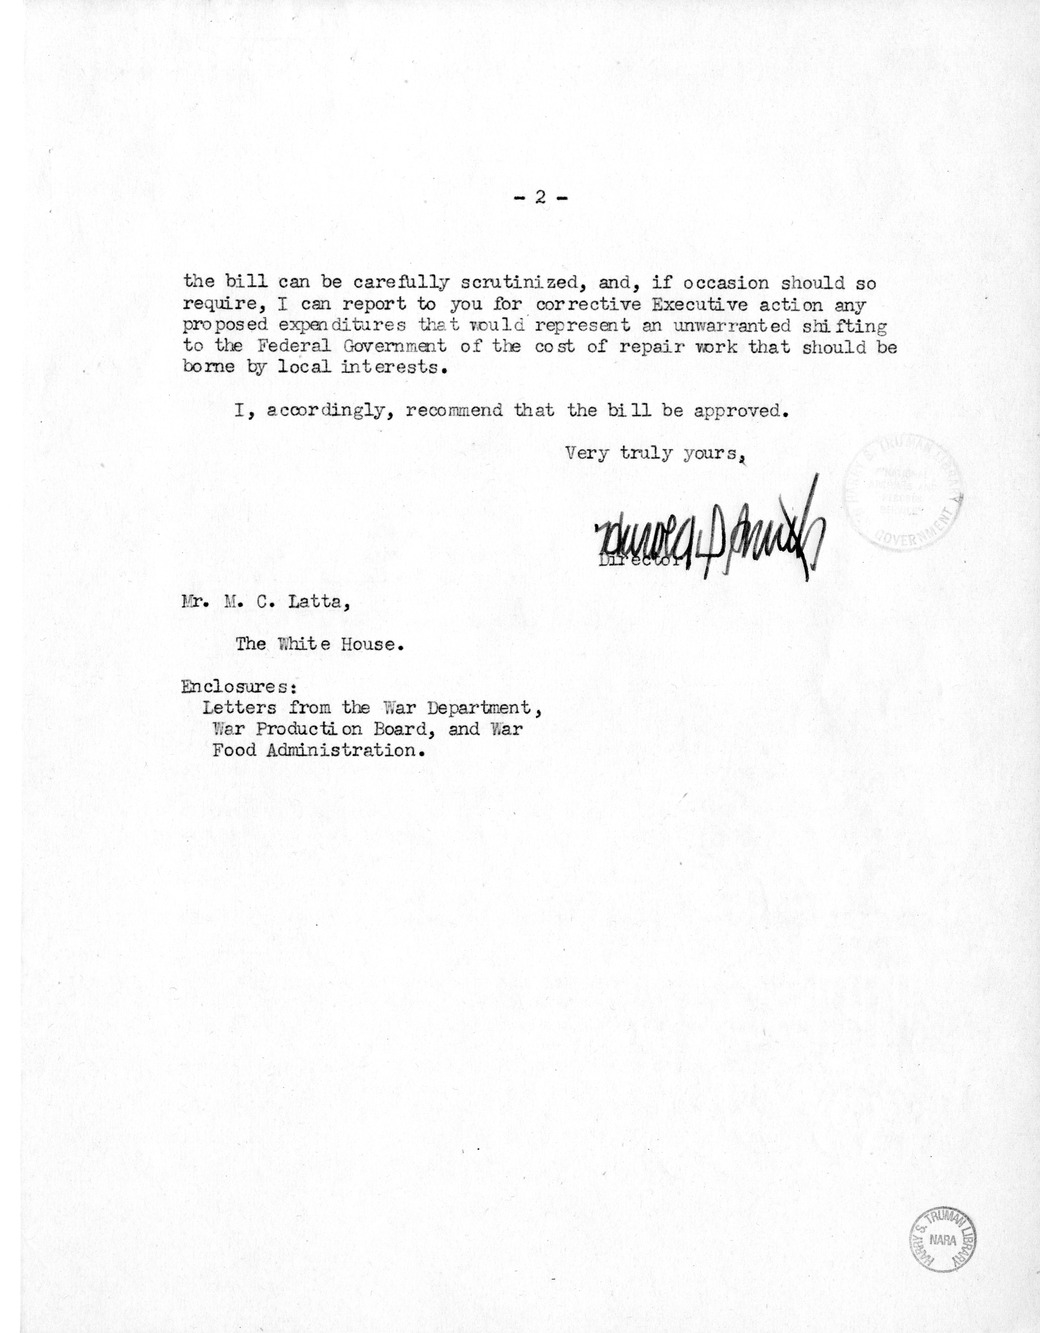 Memorandum from Harold D. Smith to M. C. Latta, S. 938, To Provide for Emergency Flood Control Work Made Necessary by Recent Floods, with Attachments